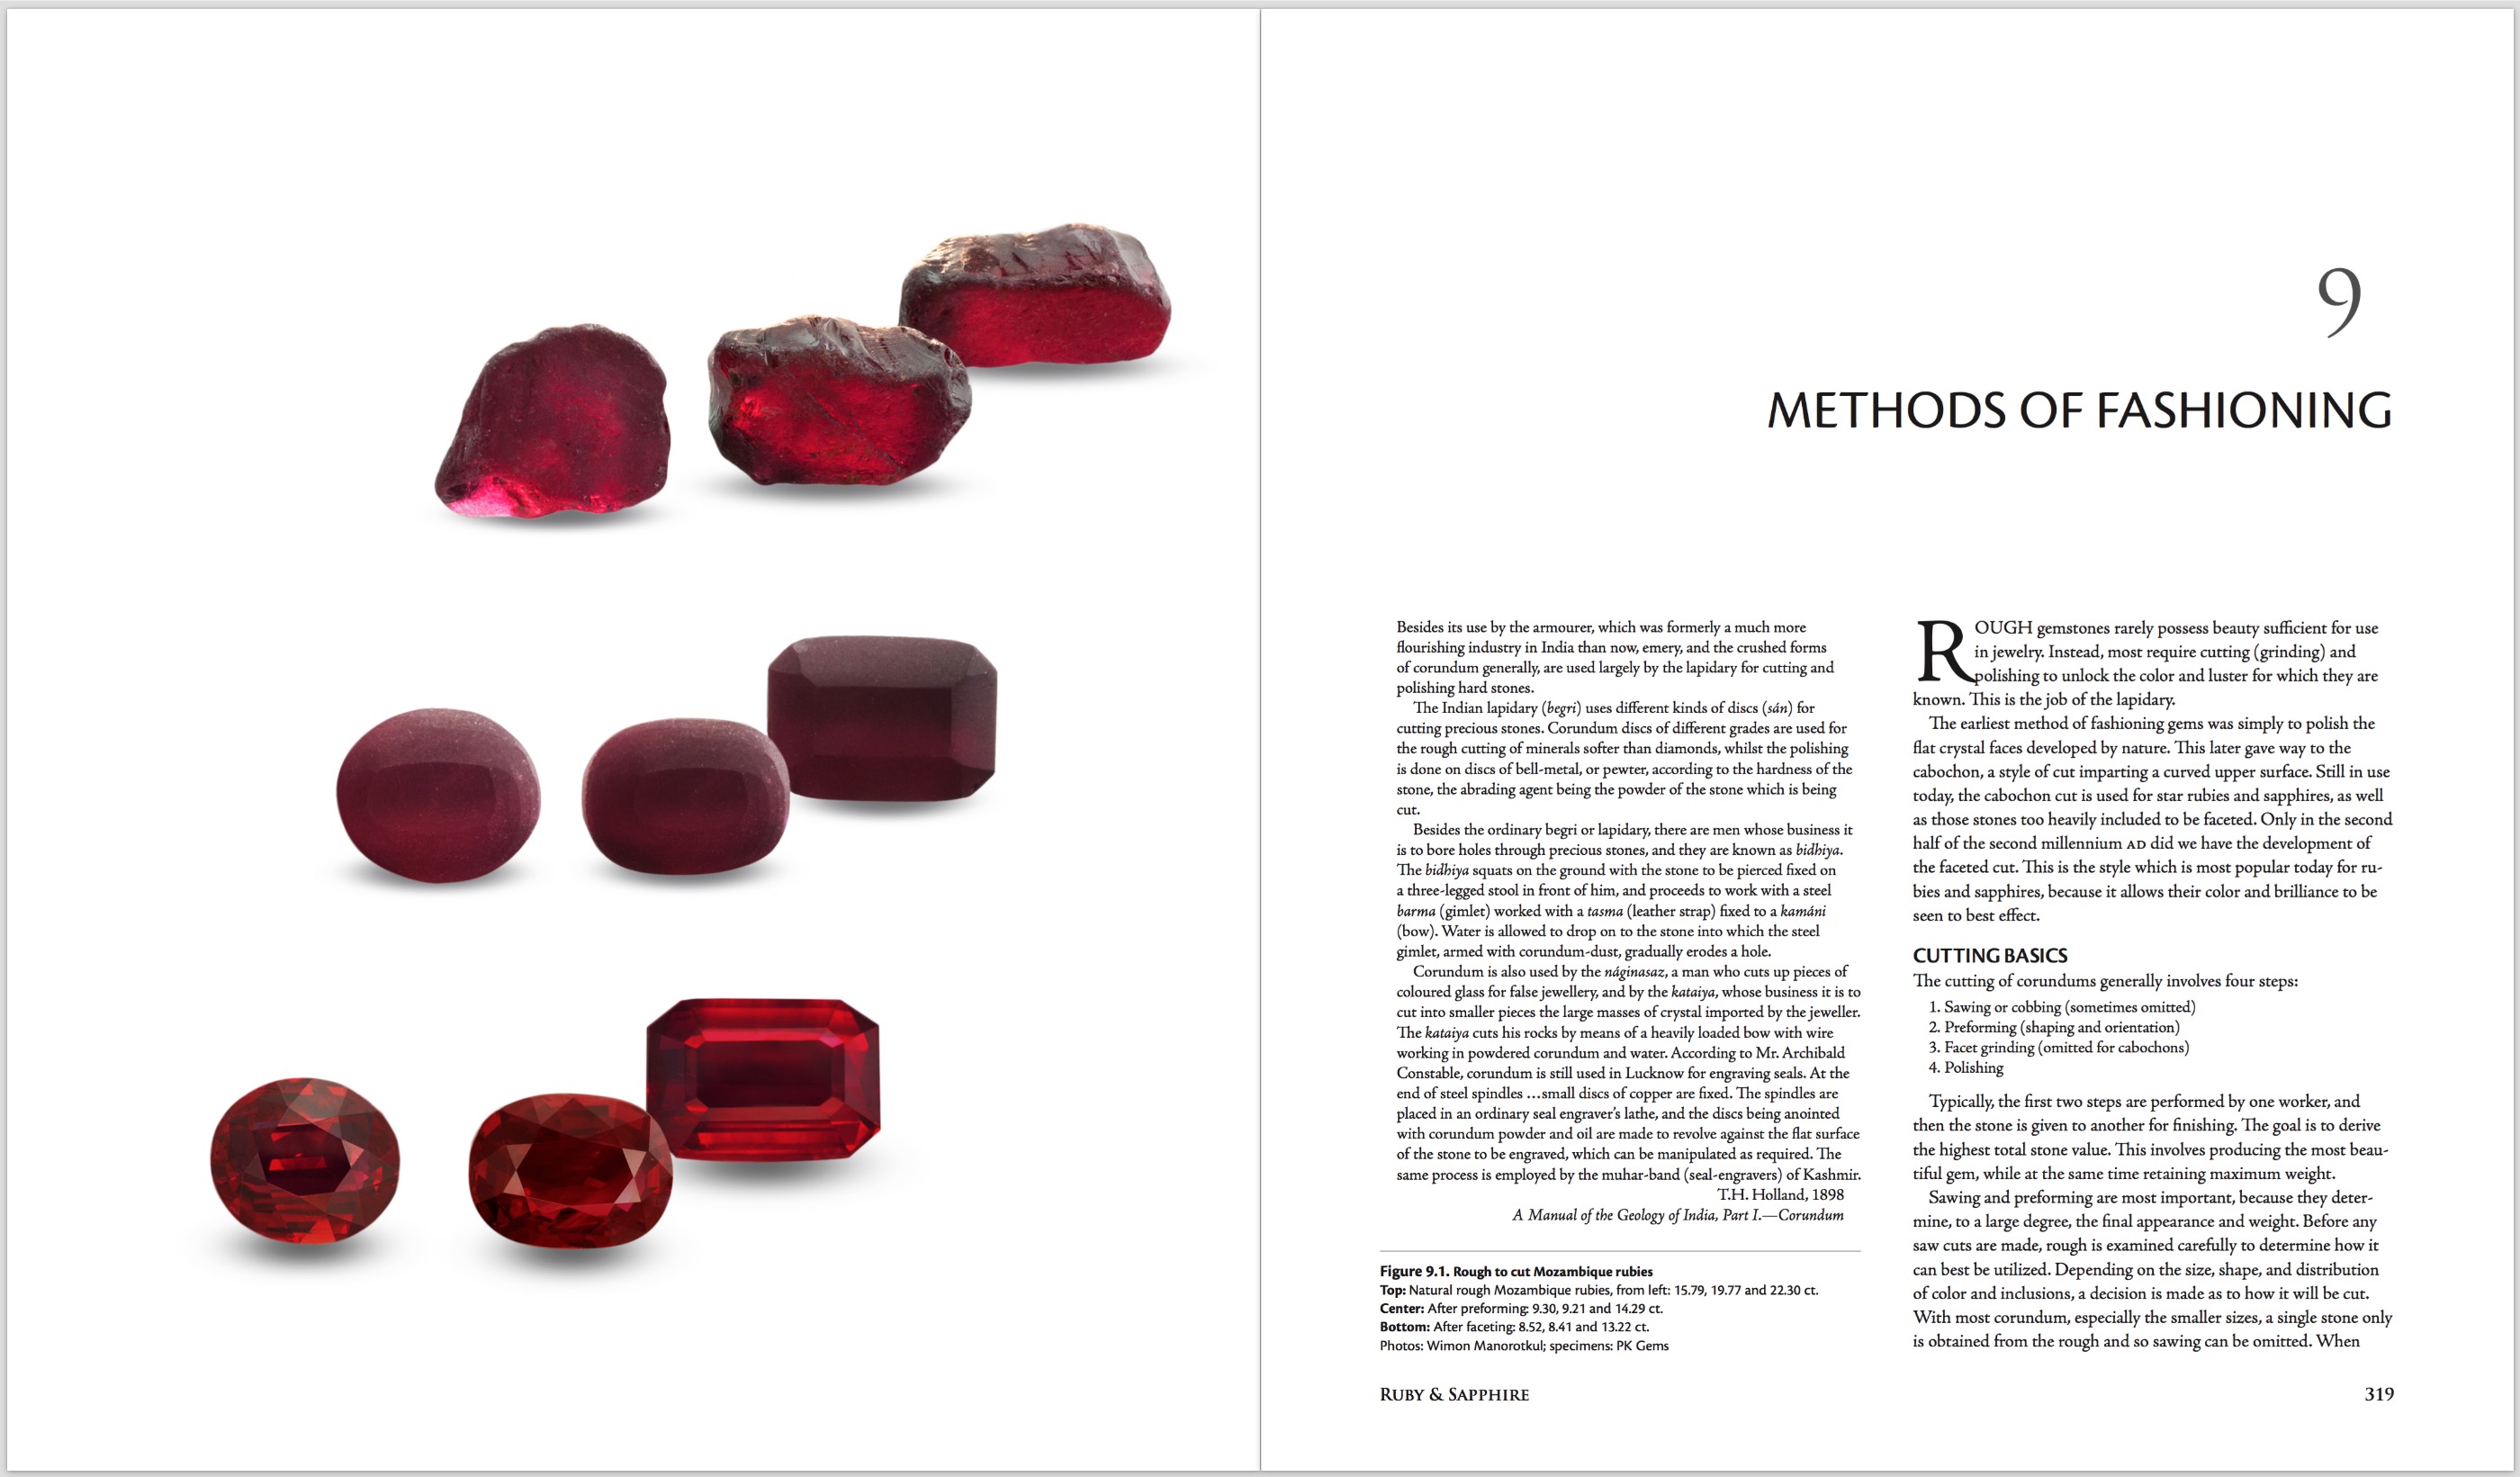 Ruby & Sapphire: A Gemologist's Guide – Methods of Fashioning